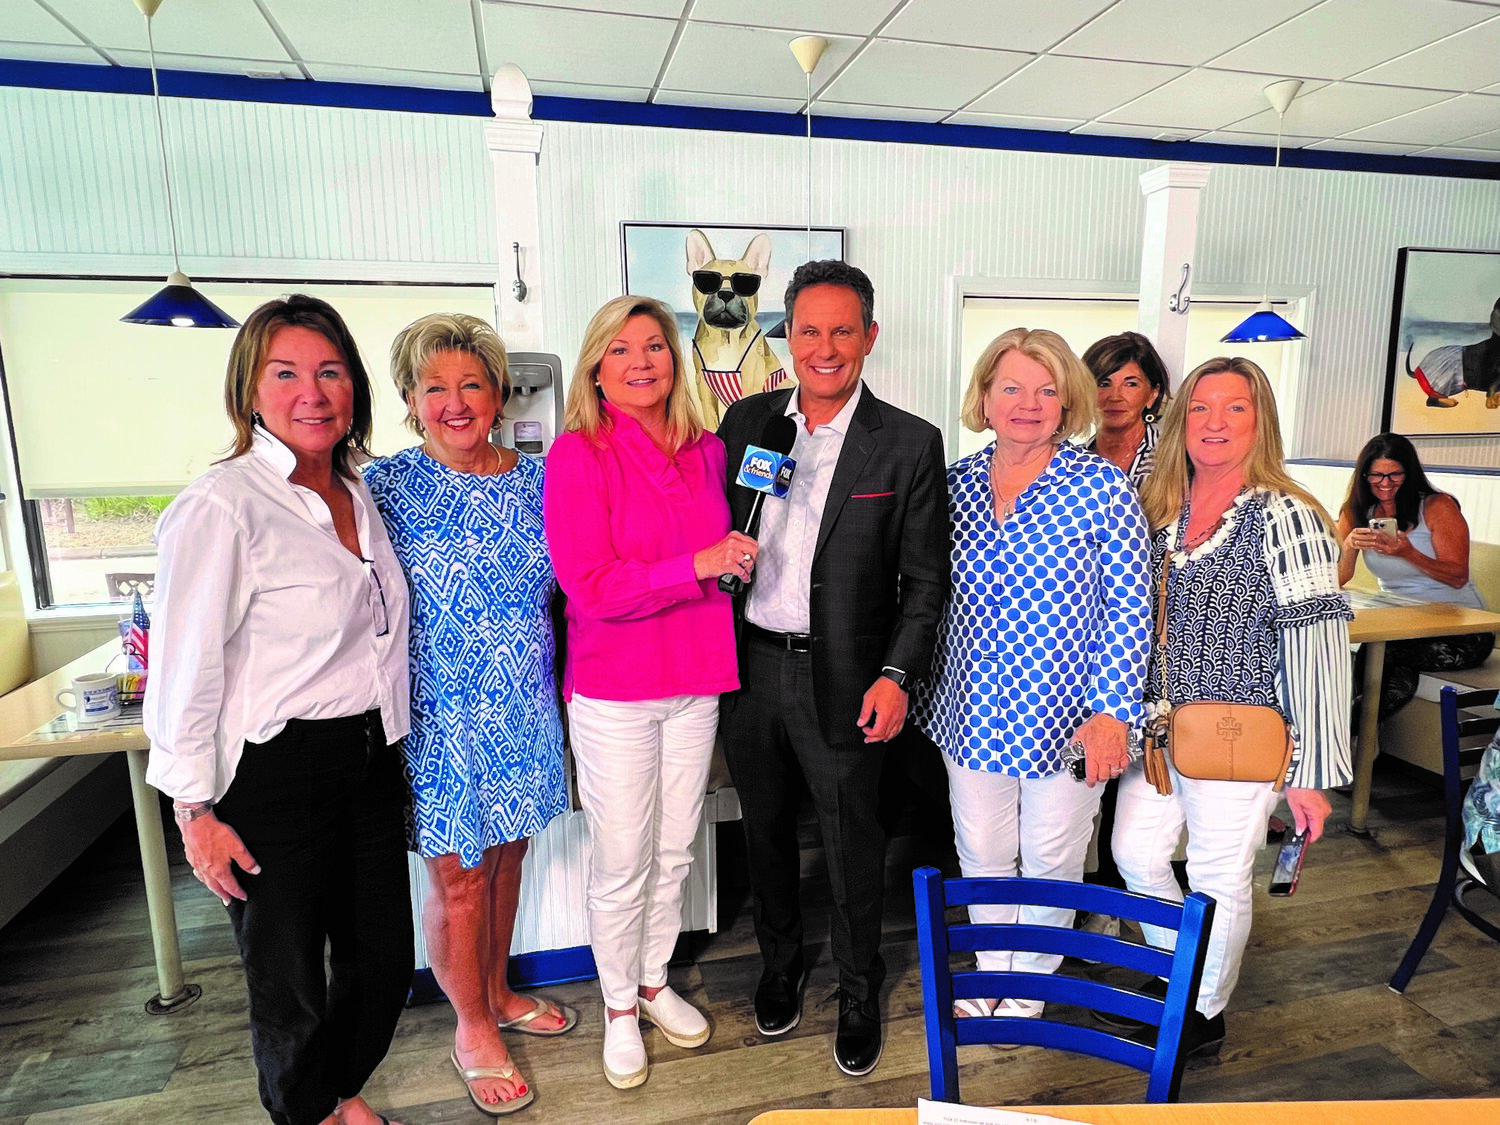 Pictured from left are: Lonnie Smith, Deb Pettry, Pam Shore, Kilmeade, Janet Westling, Leslie Miro and Susan Griffin.